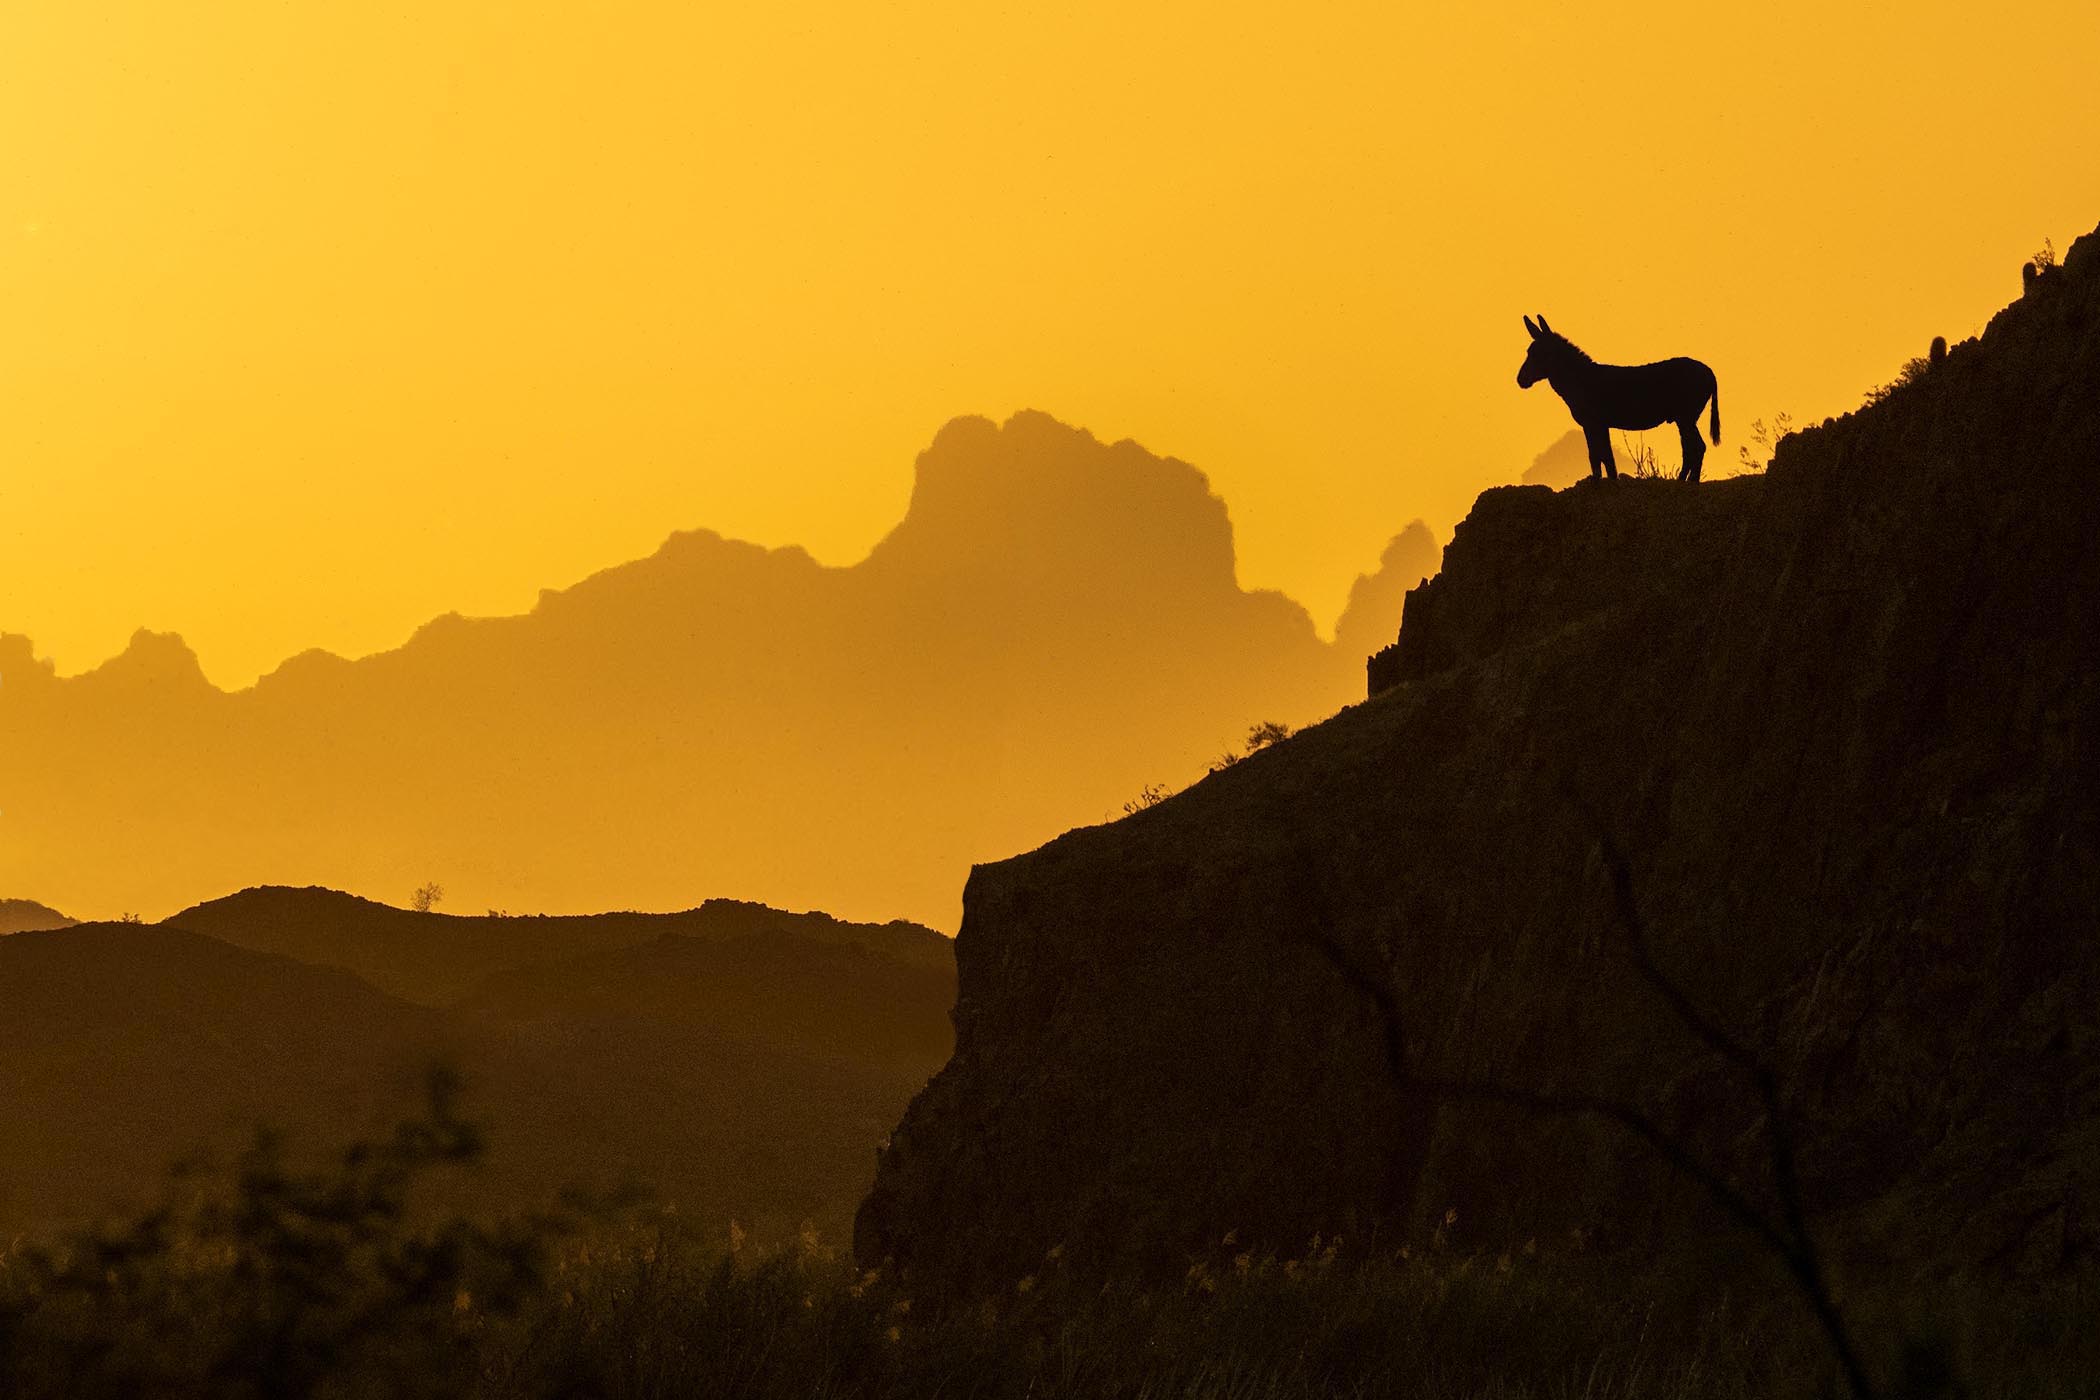 Picacho State Recreation Area dusk landscape with burro overlay (burro from Shutterstock P4071120).